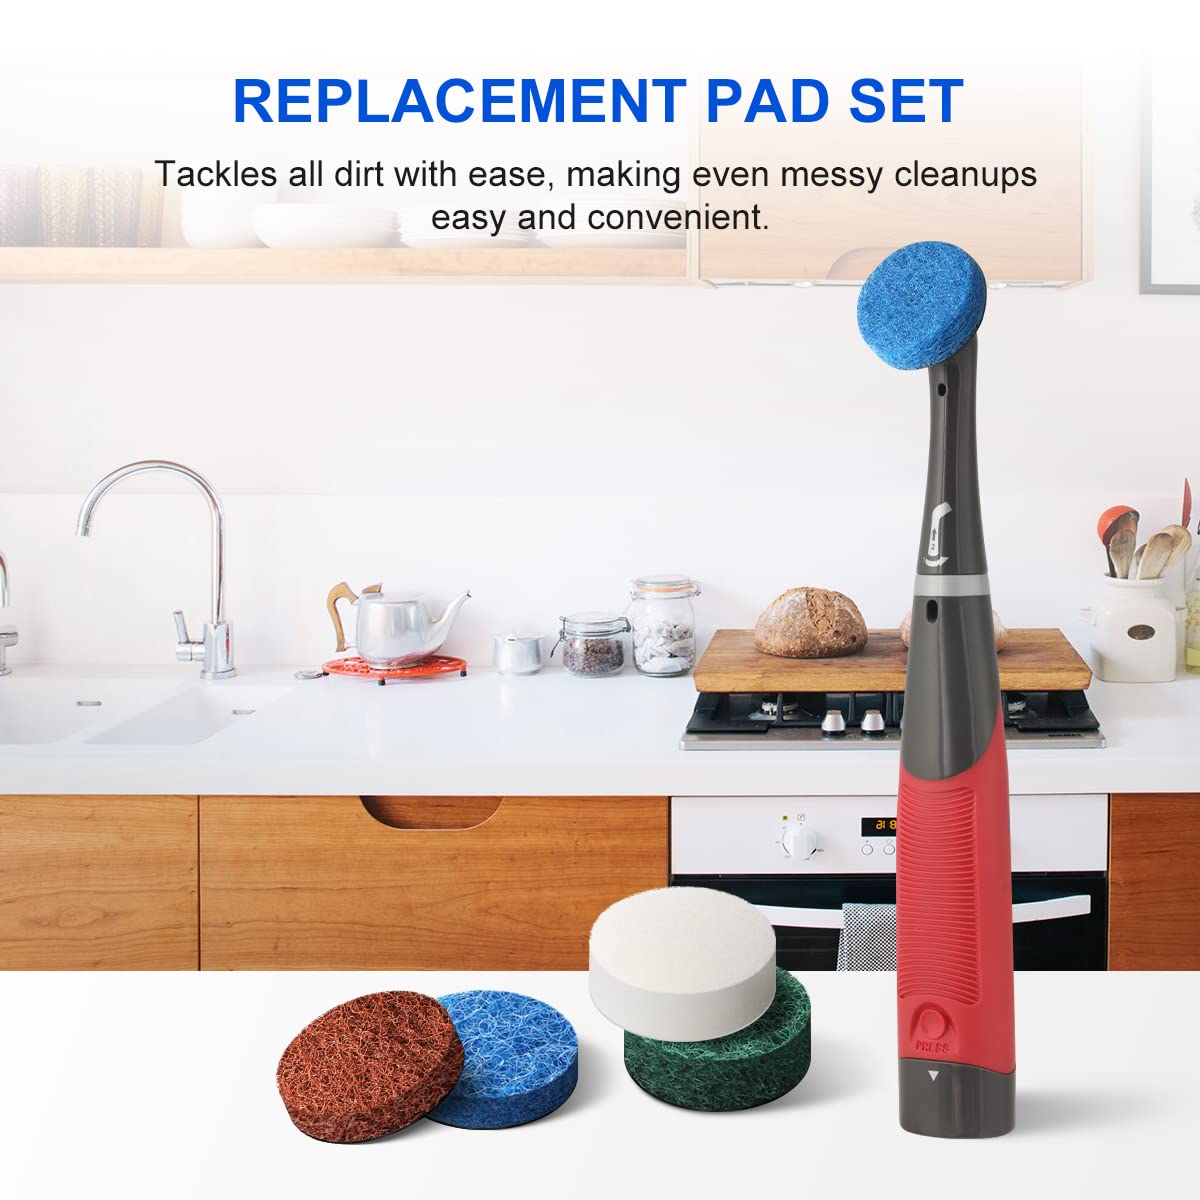 tackles all dirt with ease, ,making even messy cleanups easy and convenient